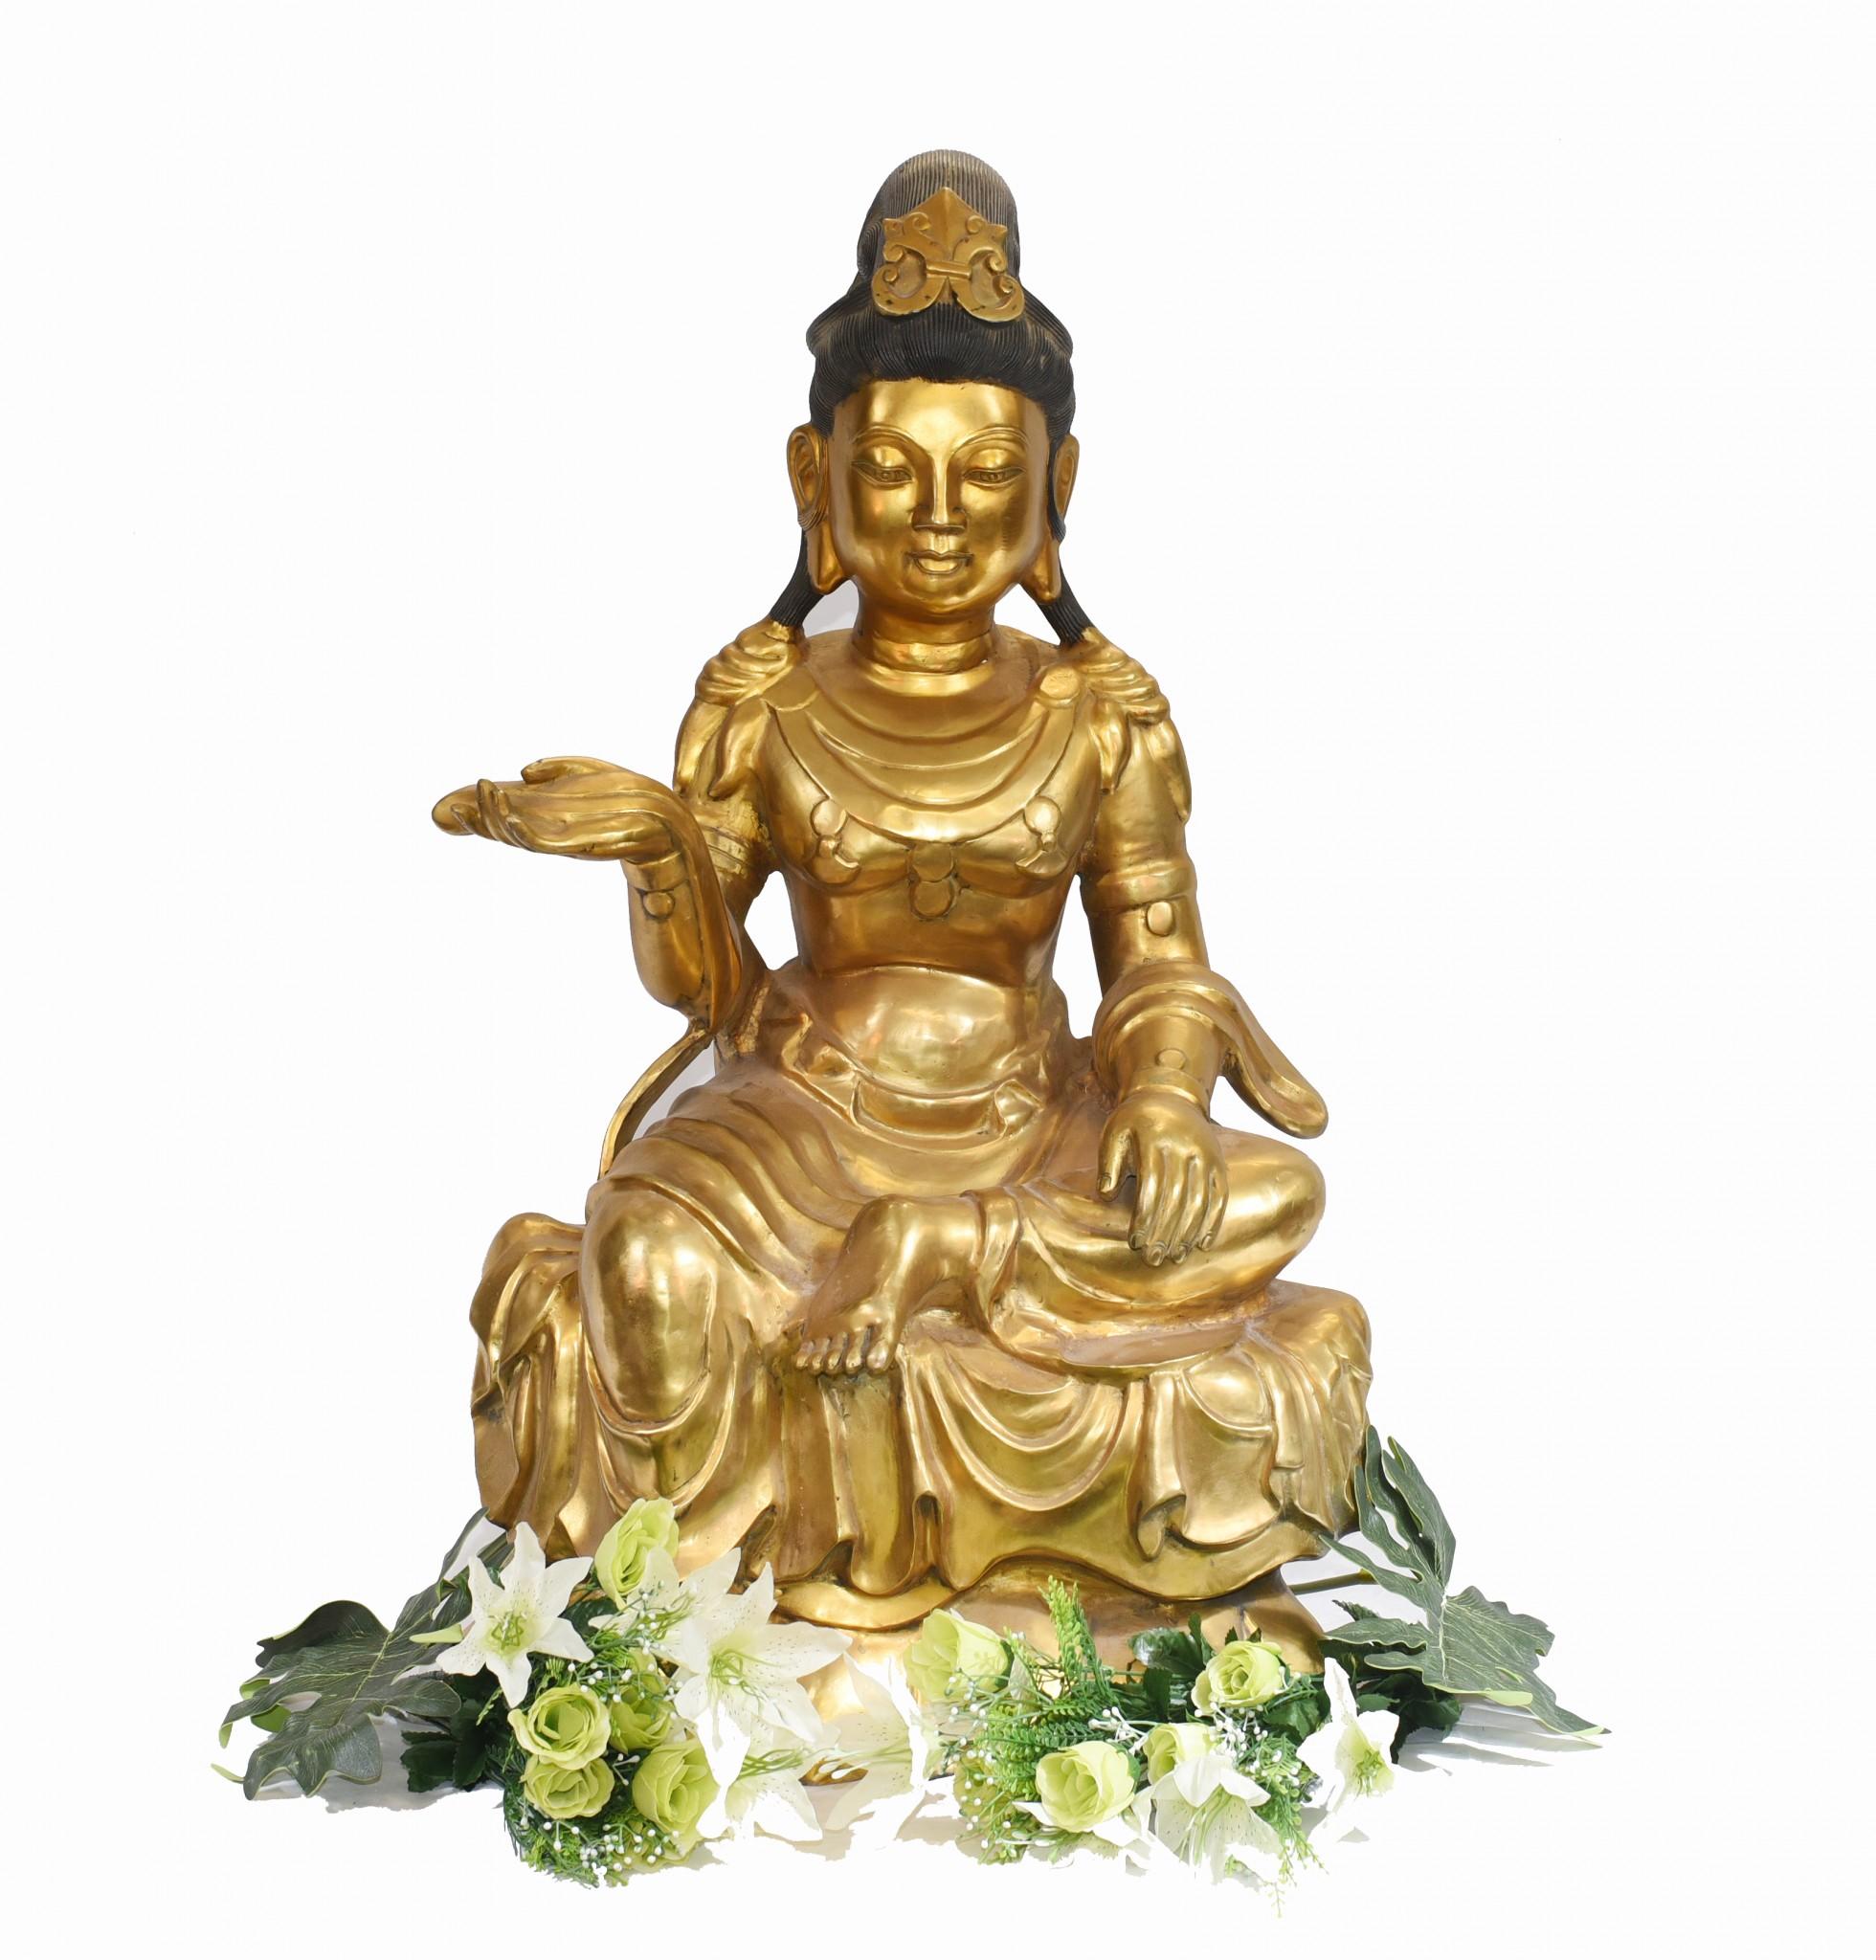 Gorgeous bronze statue of a golden bronze Buddha
Good size at over three feet tall, great for a garden or outside setting
Of course being bronze can sit outside with no fear of rusting
Definitely add serenity and calm to any setting with Buddha in